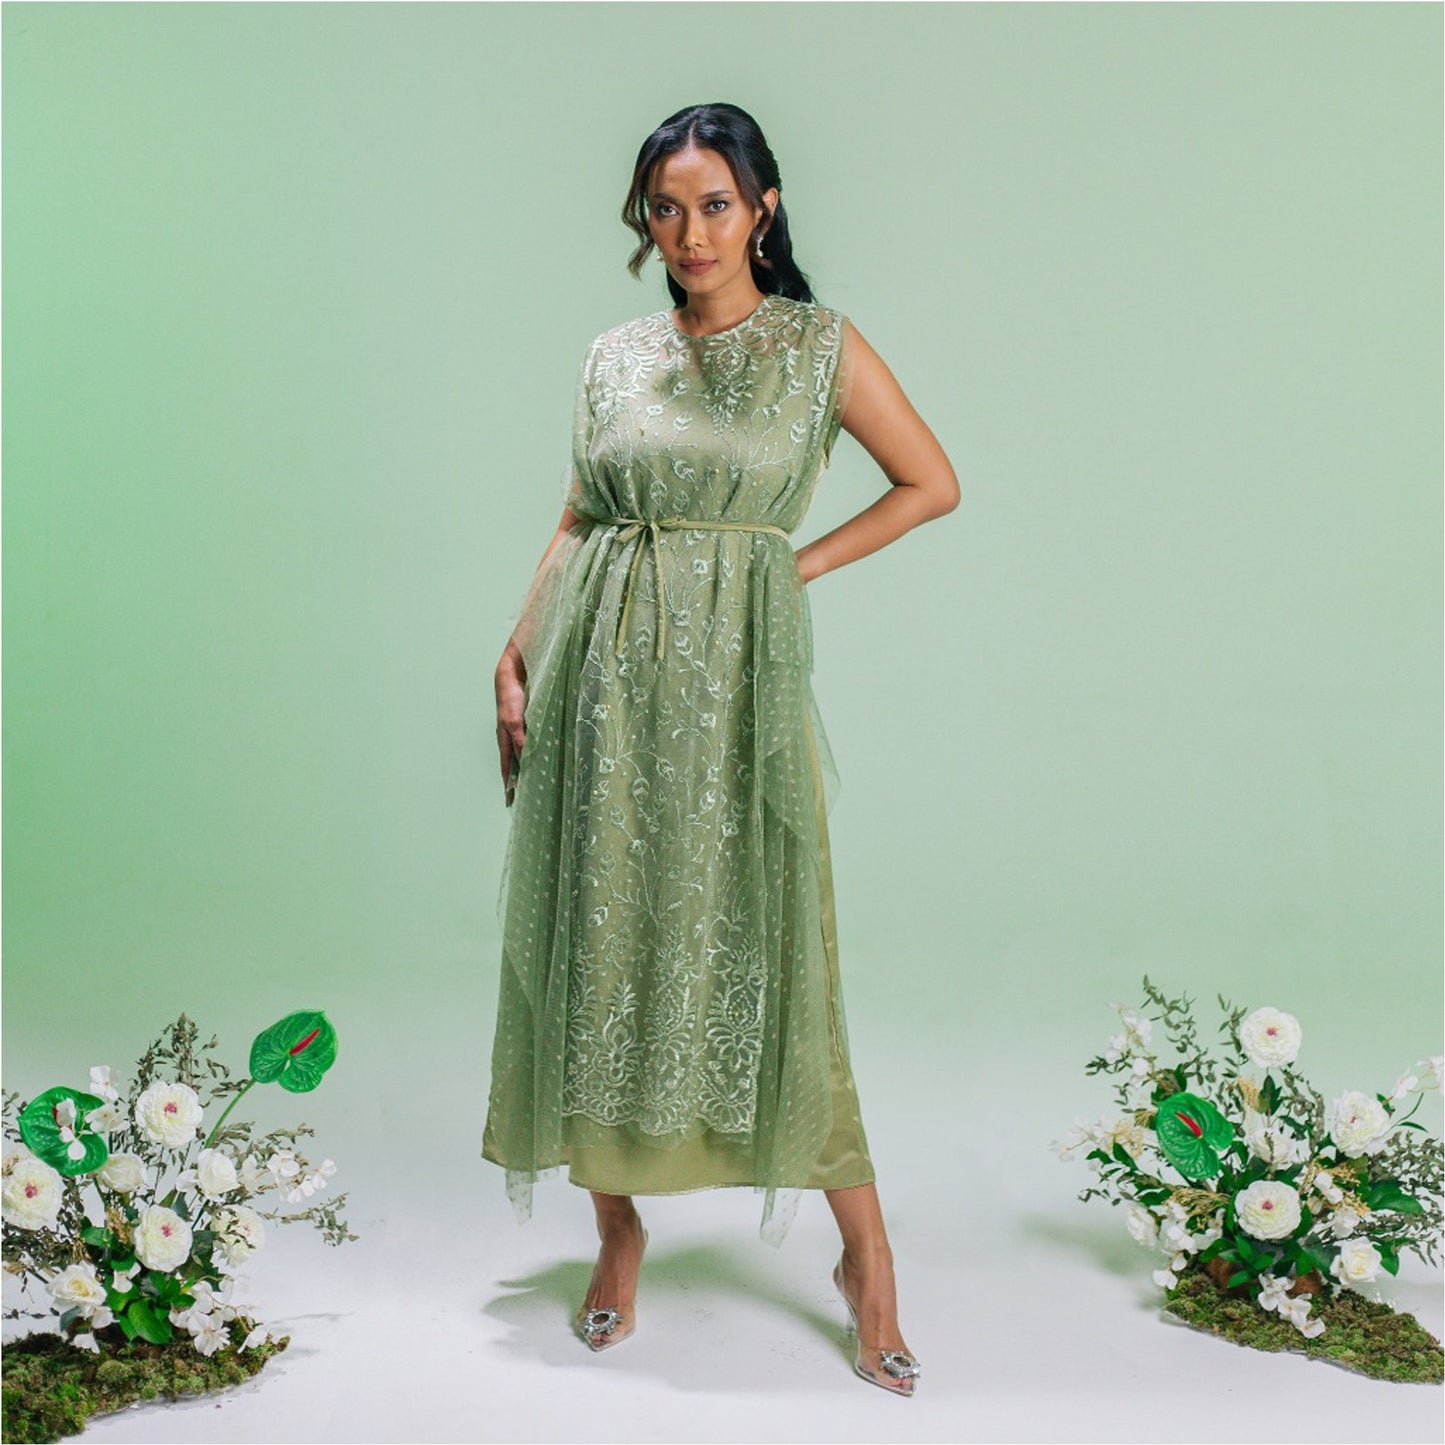 Look Different with a Samada Tulle Dress: Elegant and Stunning for Every Occasion, Women Dress, Women Formal, Gamis, Islamic Dress